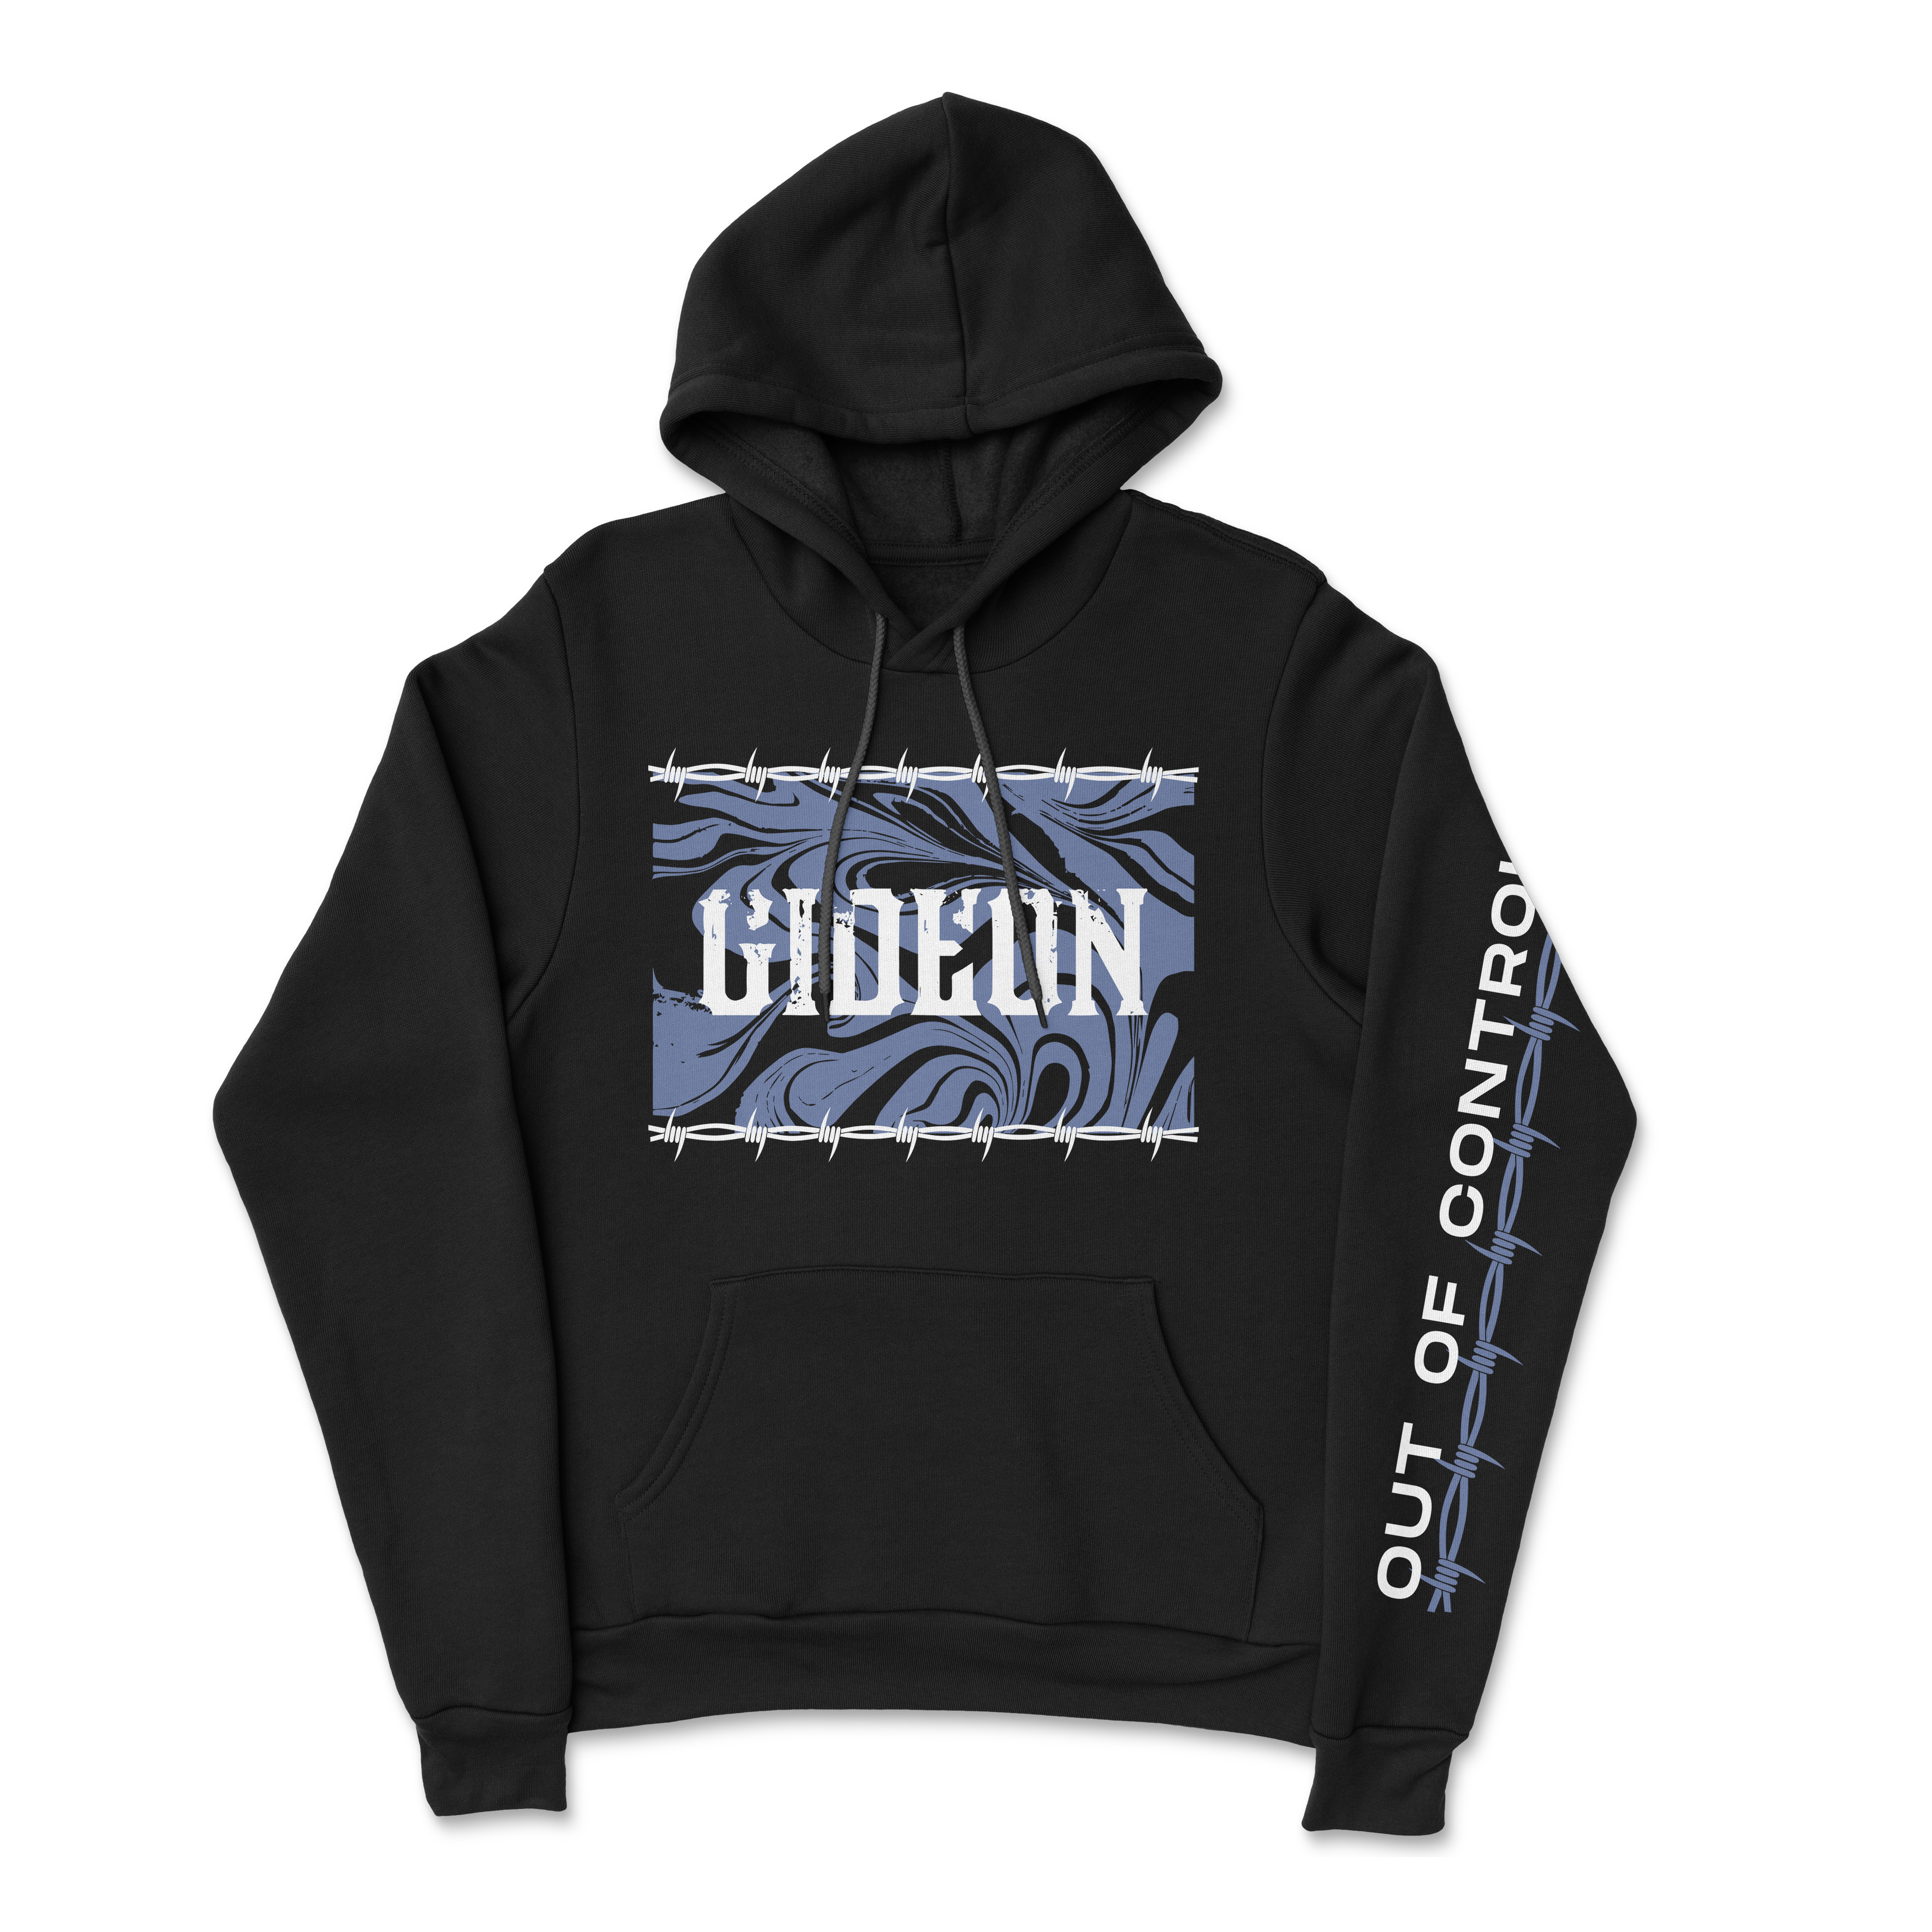 Gideon - Out of Control Hoodie